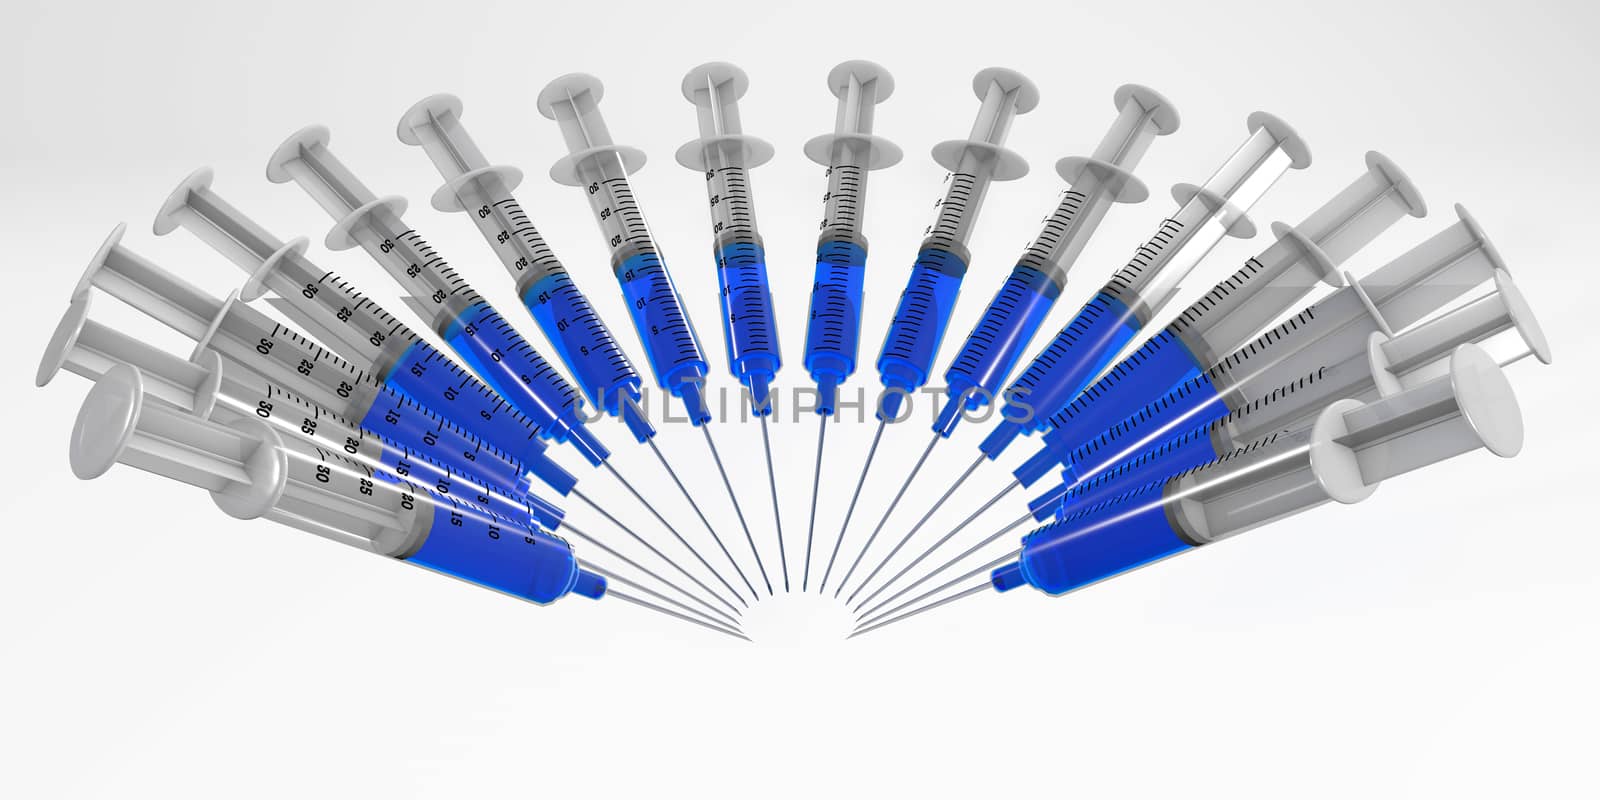 syringes arranged 3d rendering medical vaccine concept by F1b0nacci